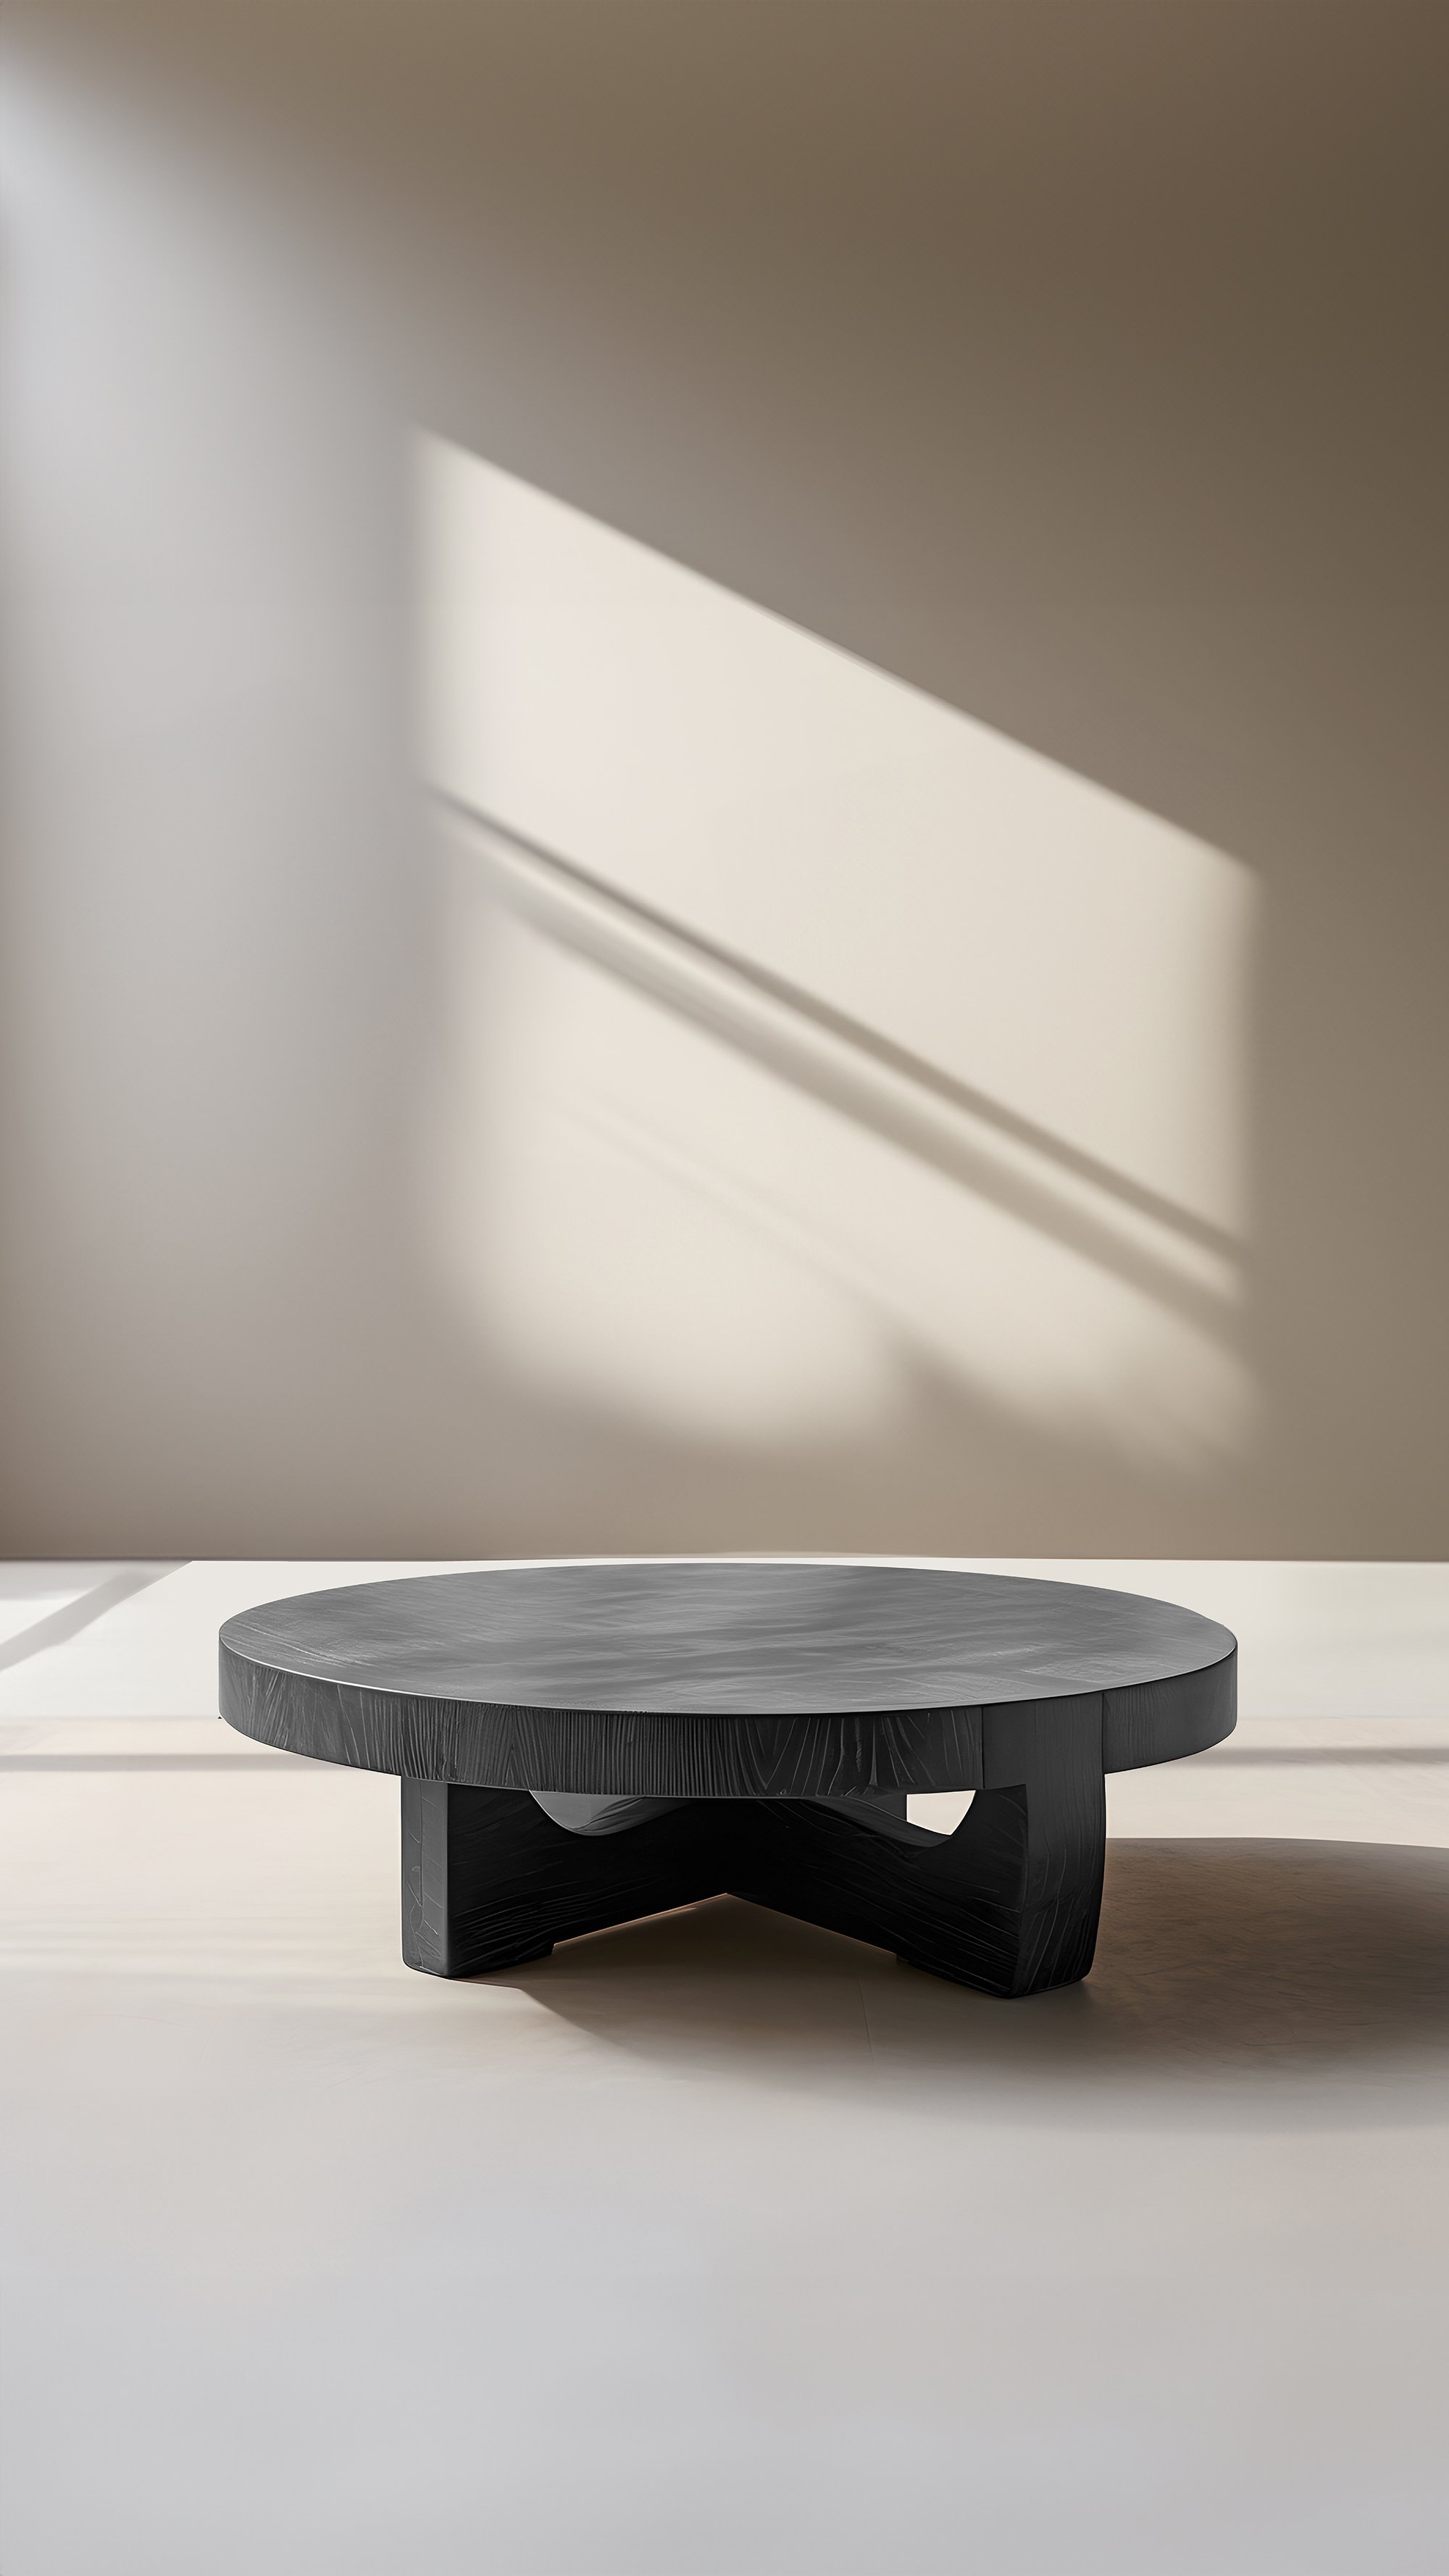 Two-Level Round Coffee Table - Layered Fundamenta 40 by NONO —5.jpg